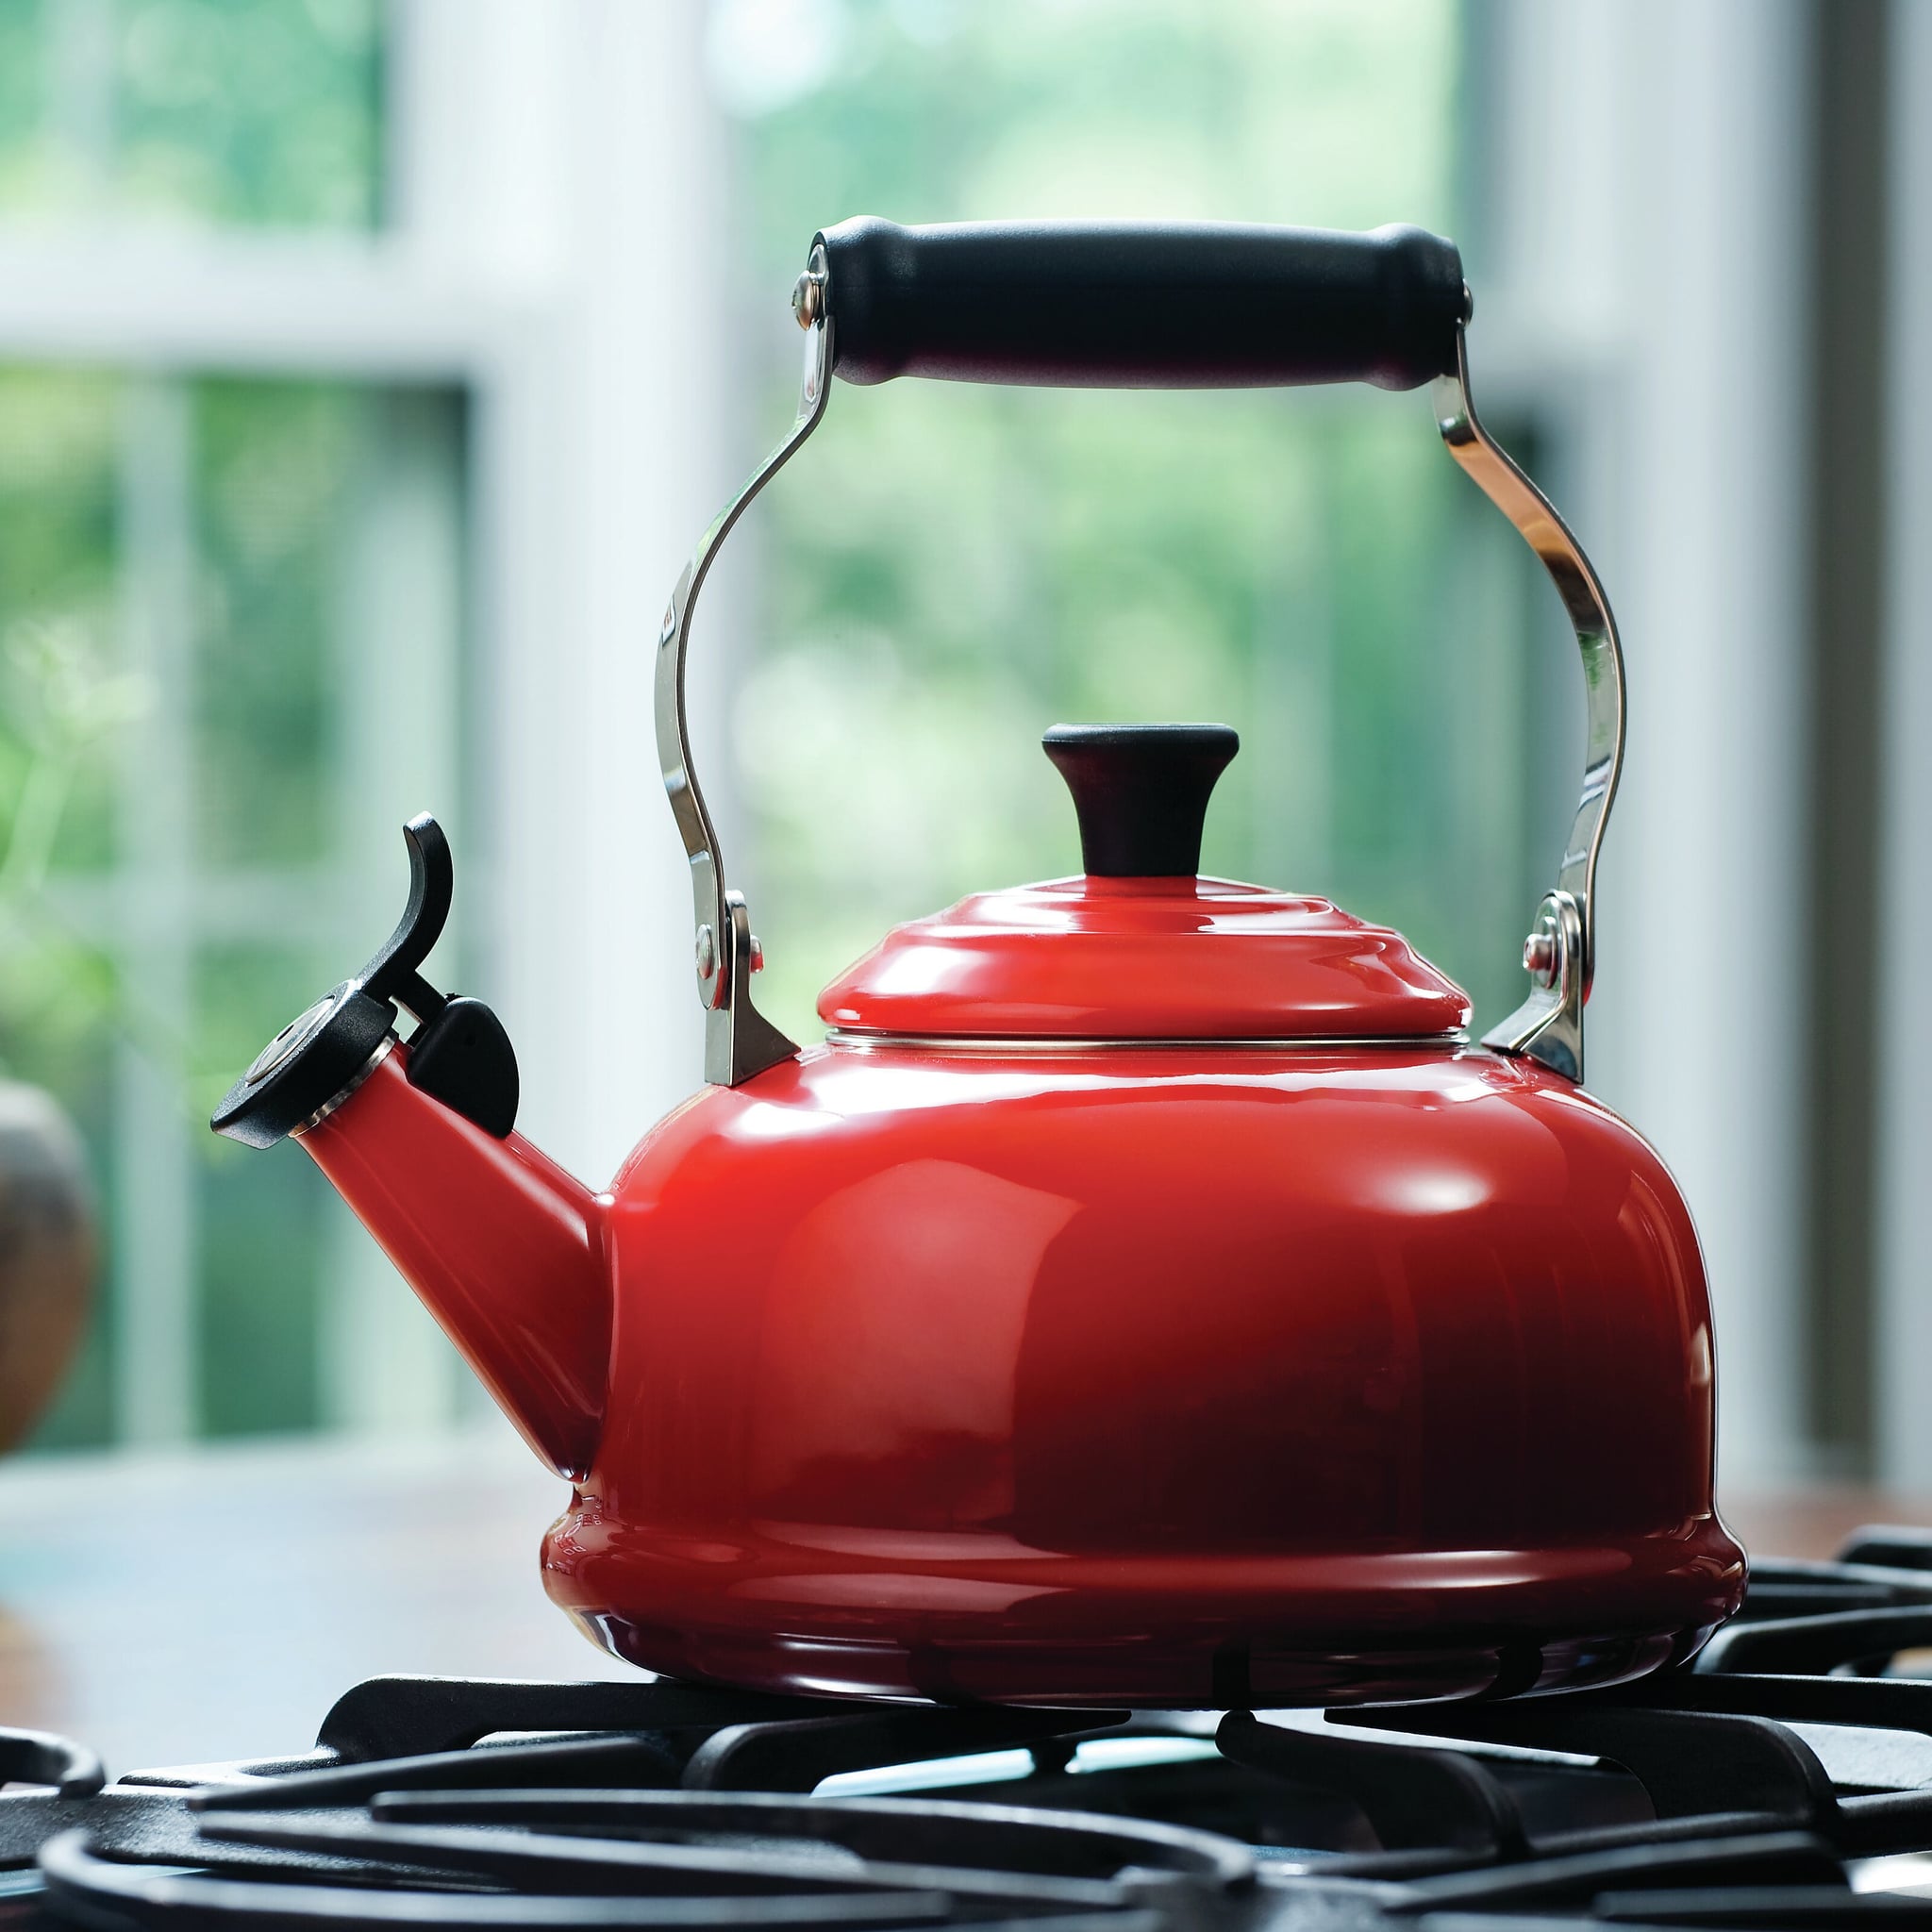 Better Chef 3-Liter Whistling Tea Kettle Red Color Stainless Steel-Heavy Duty